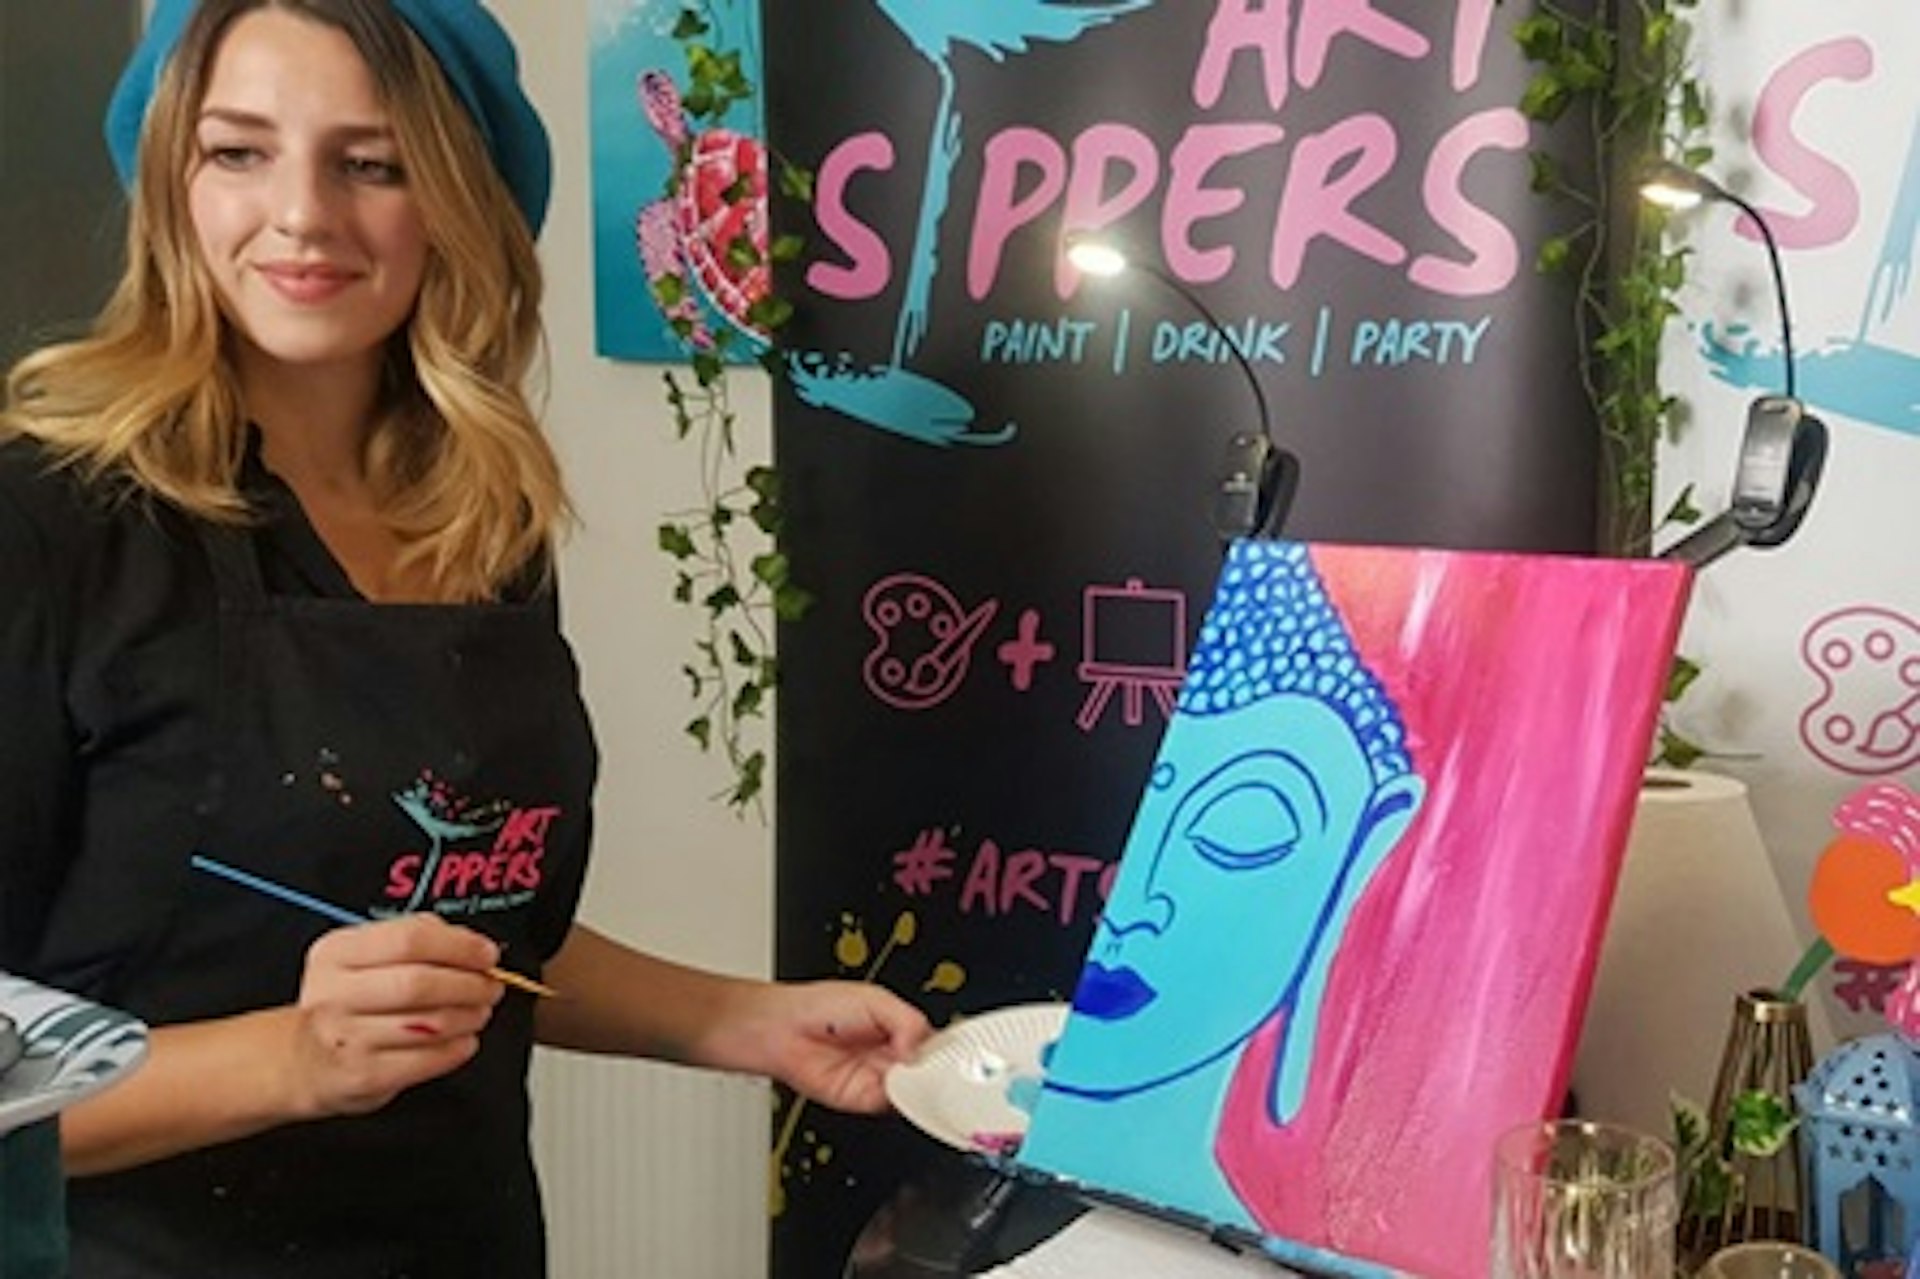 Get Creative Together - Date Night Live Virtual Art Experience with Drinks for Two with Art Sippers 2